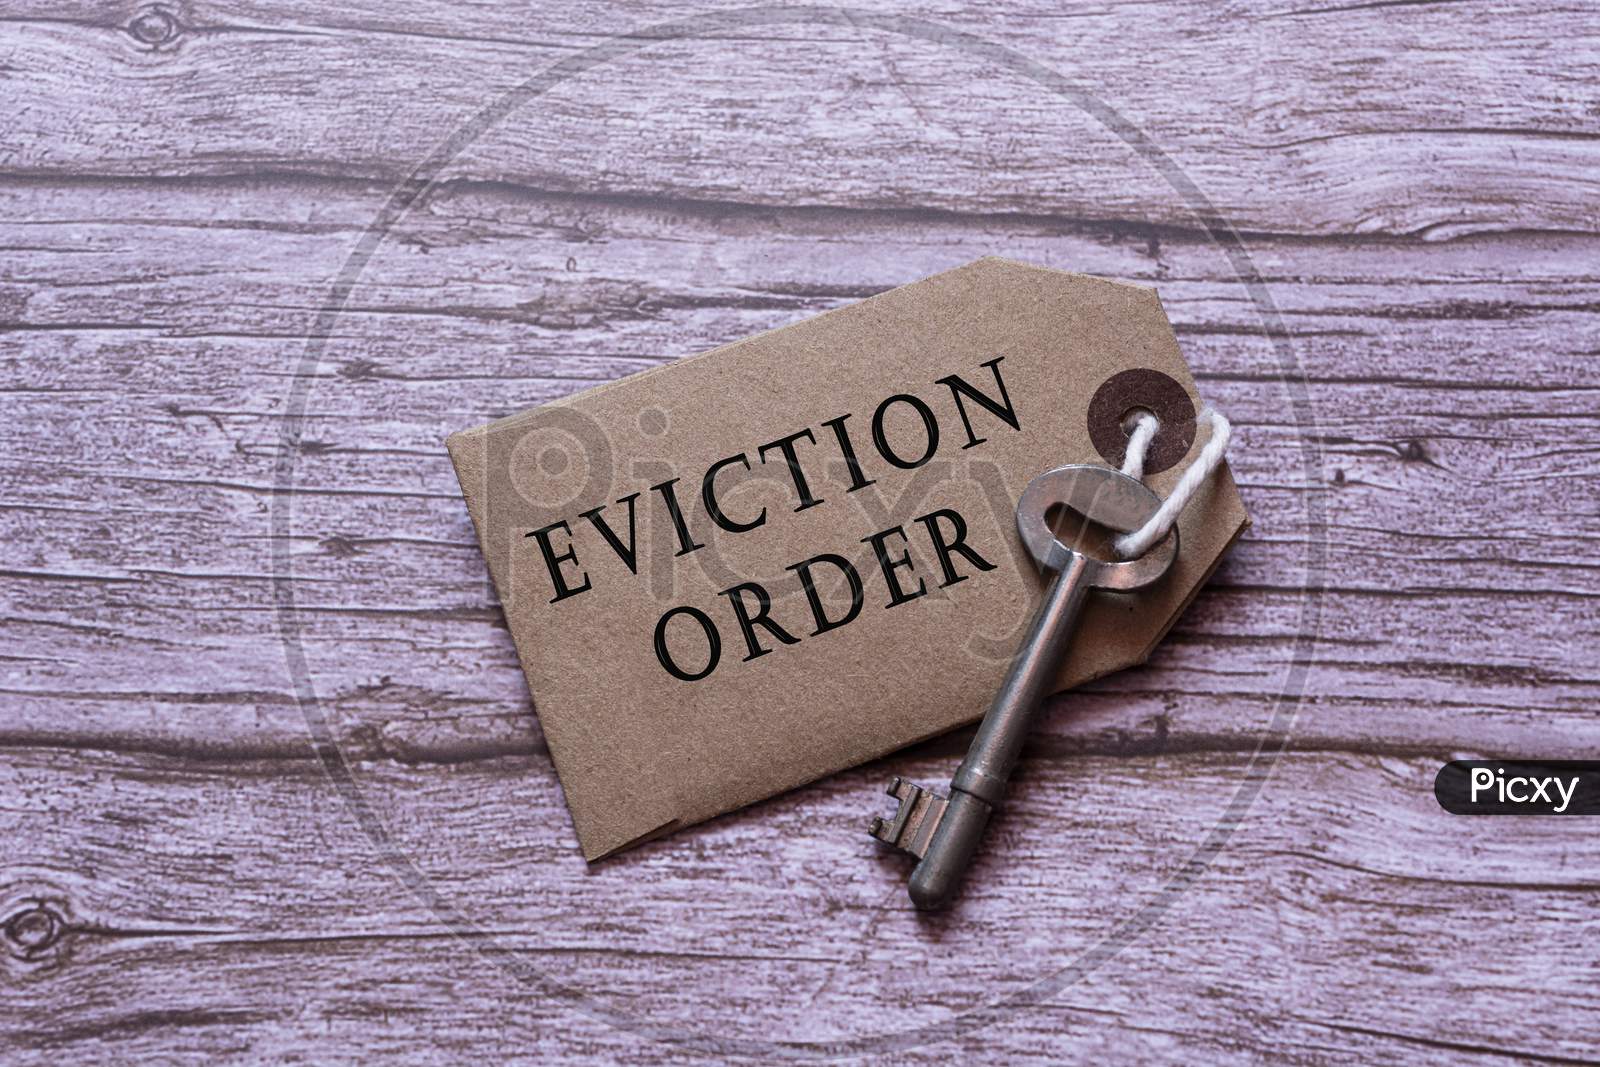 Text On Brown Tag With Key On Wooden Table - Eviction Order